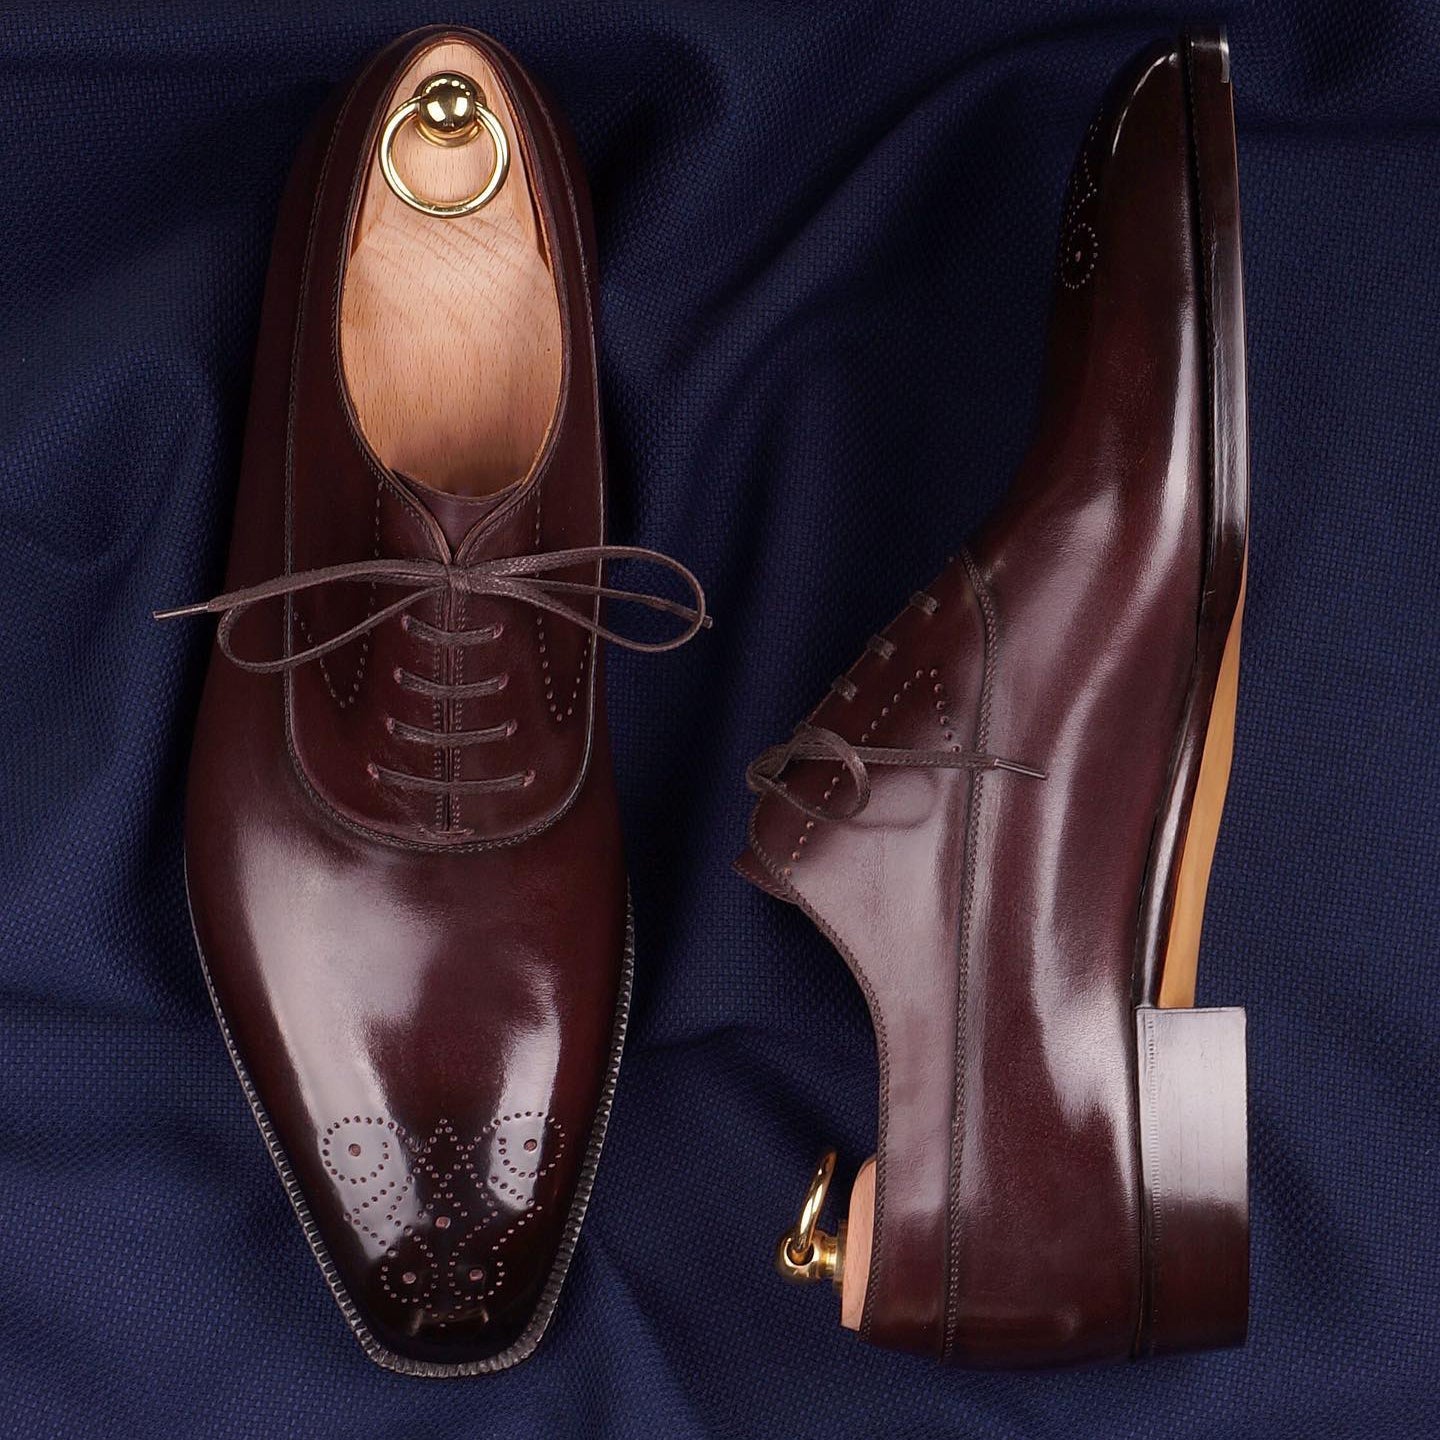 Floating medallions and swan neck decorative brogue oxfords